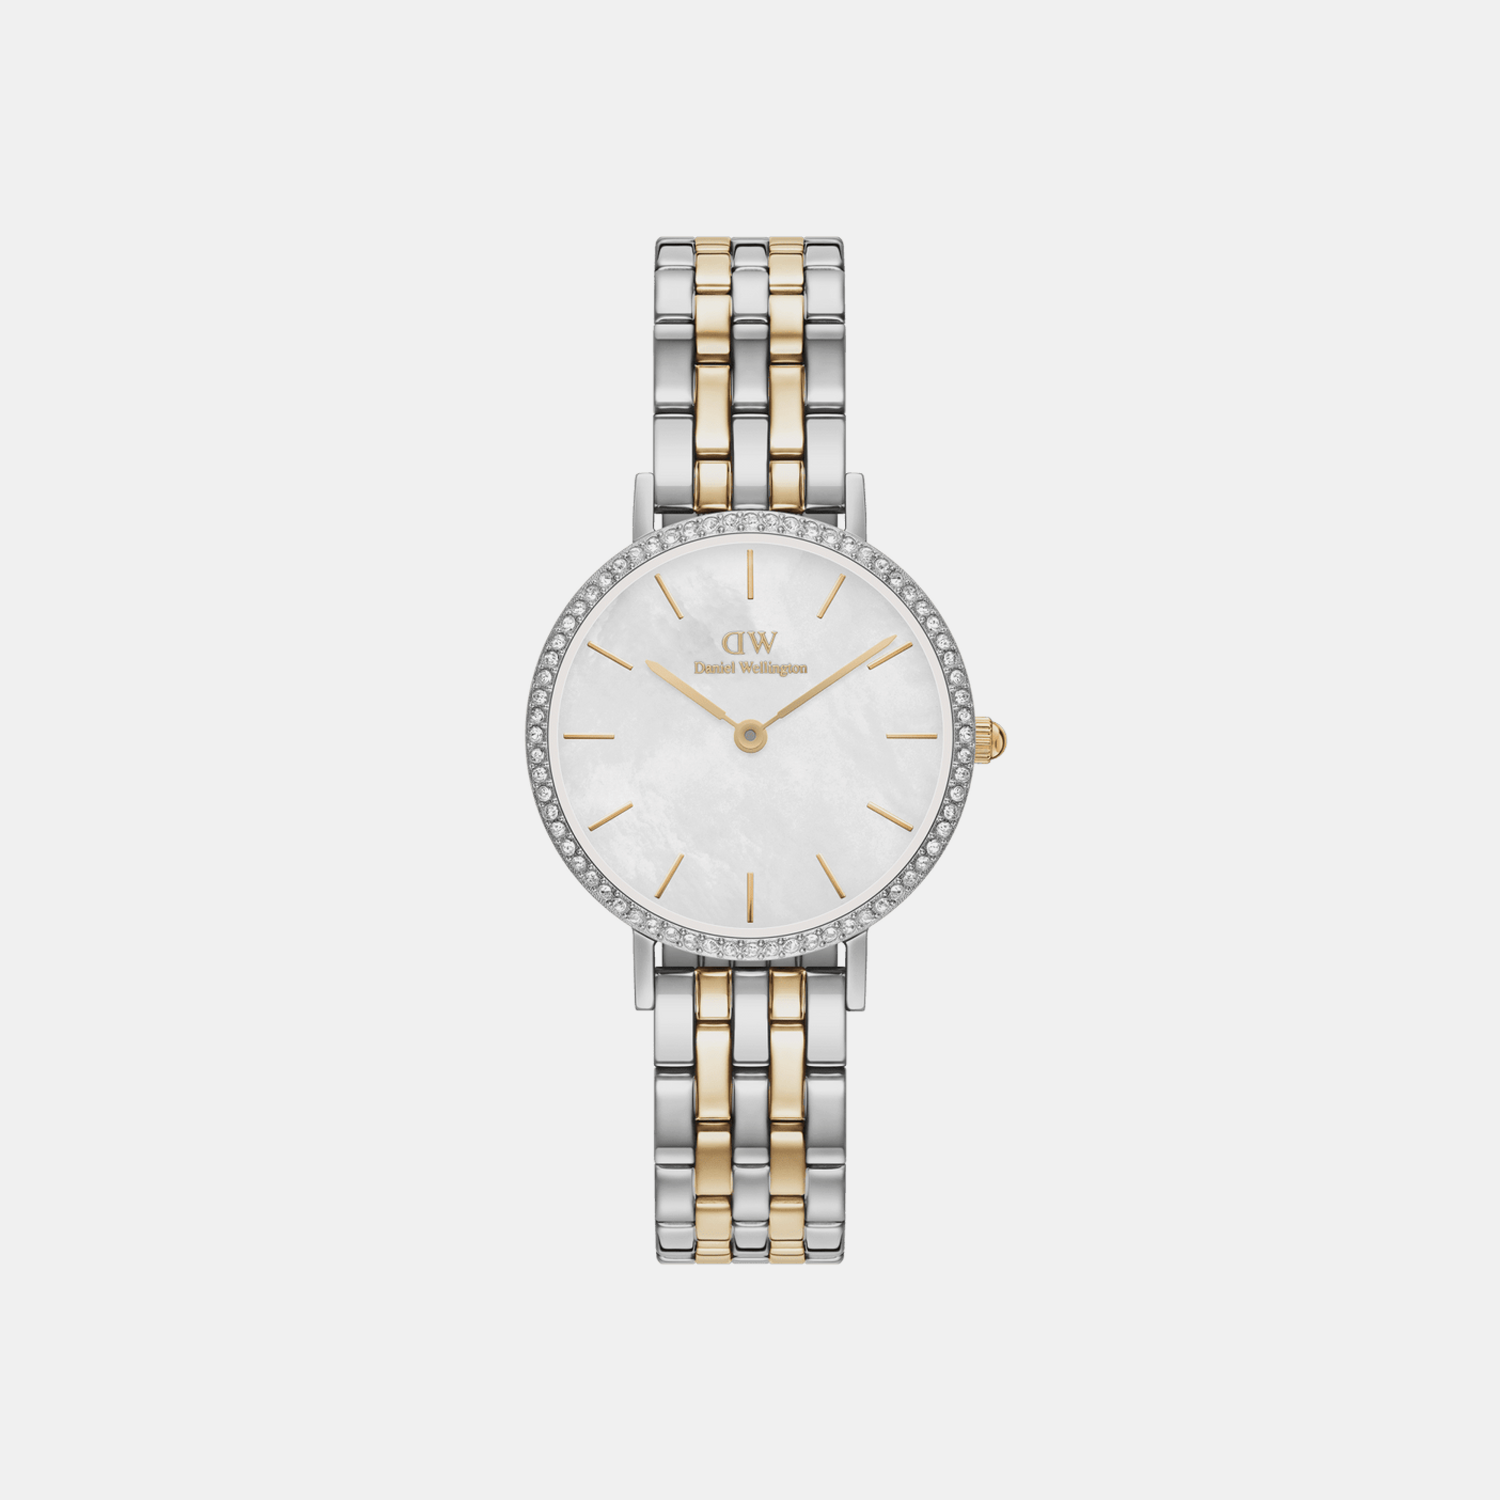 Amazon.com: Citizen Women's Eco-Drive Dress Classic Watch in Stainless  Steel, Mother of Pearl Dial, 26mm (Model: EW1670-59D) : Citizen: Clothing,  Shoes & Jewelry